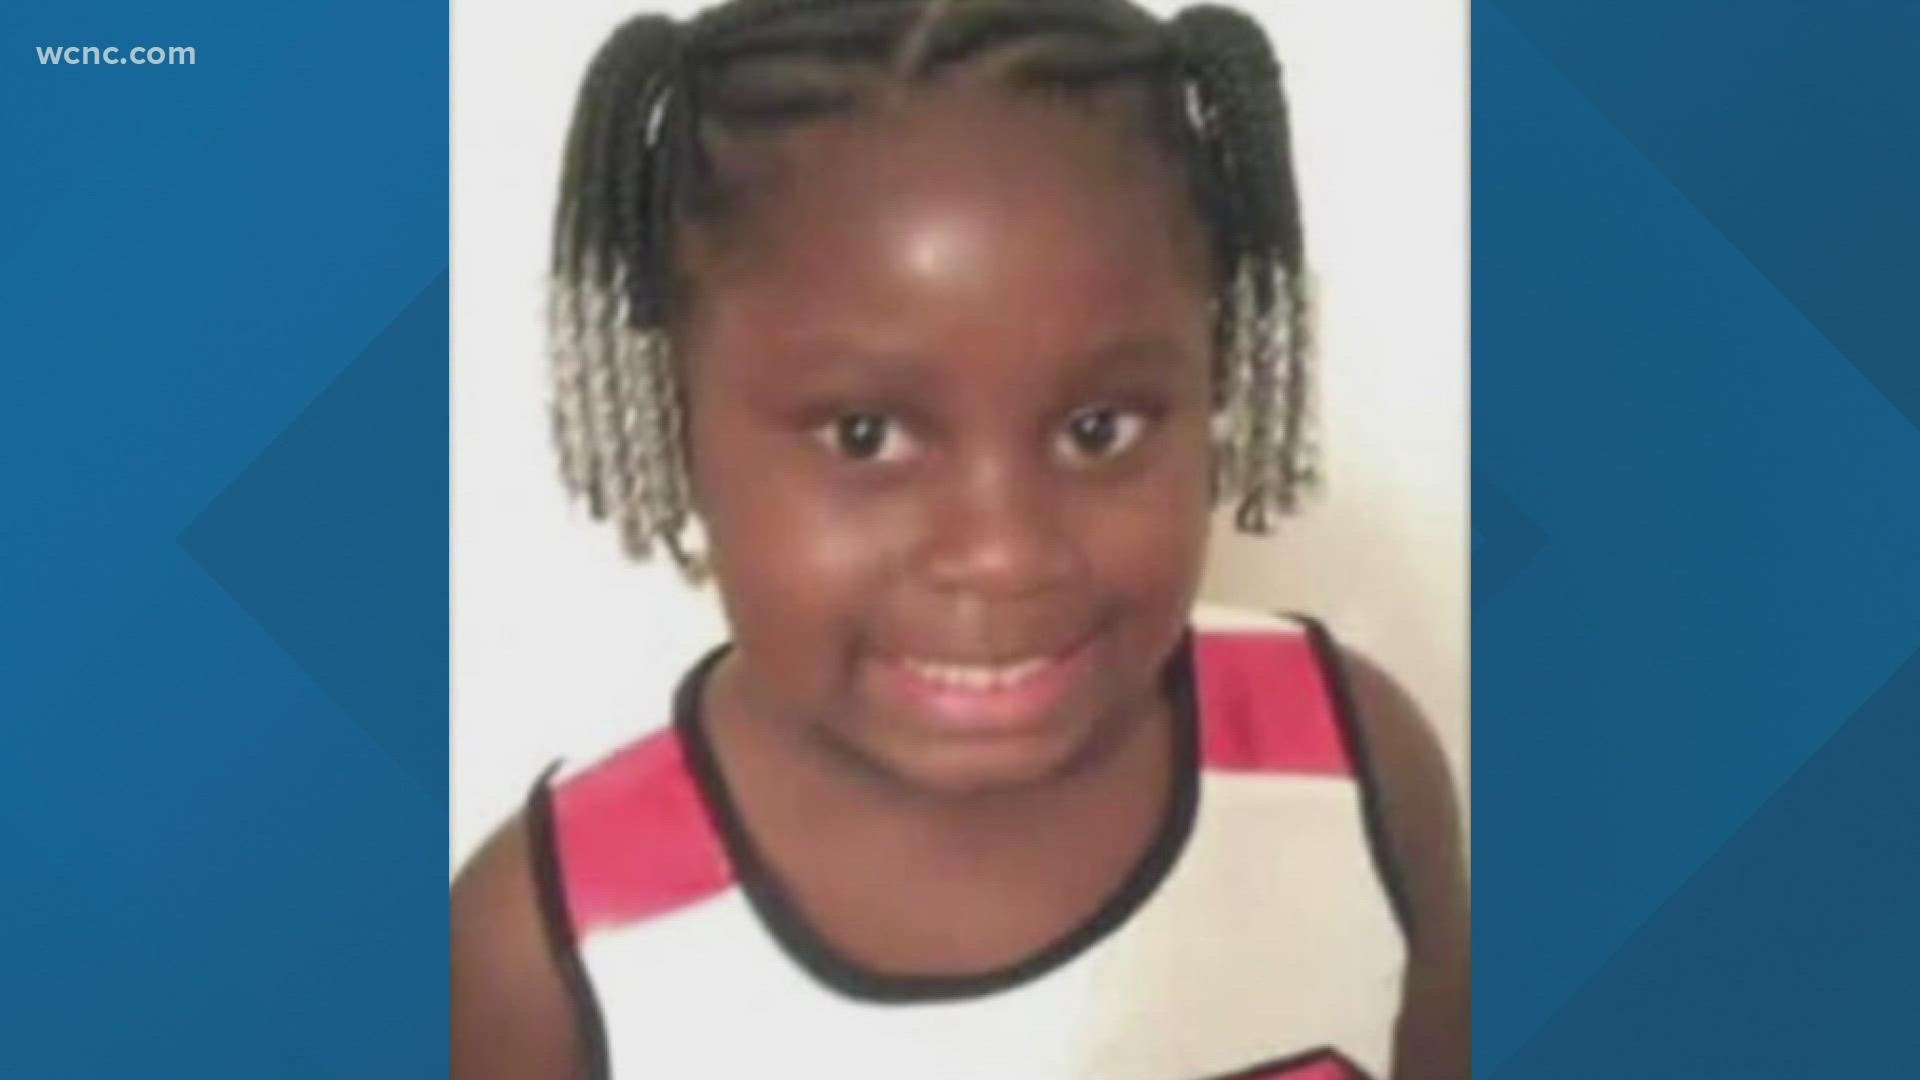 The Rowan County Sheriff’s Office has seized a rifle connected to the December 2016 murder of 7-year-old  A'yanna Allen in Salisbury.